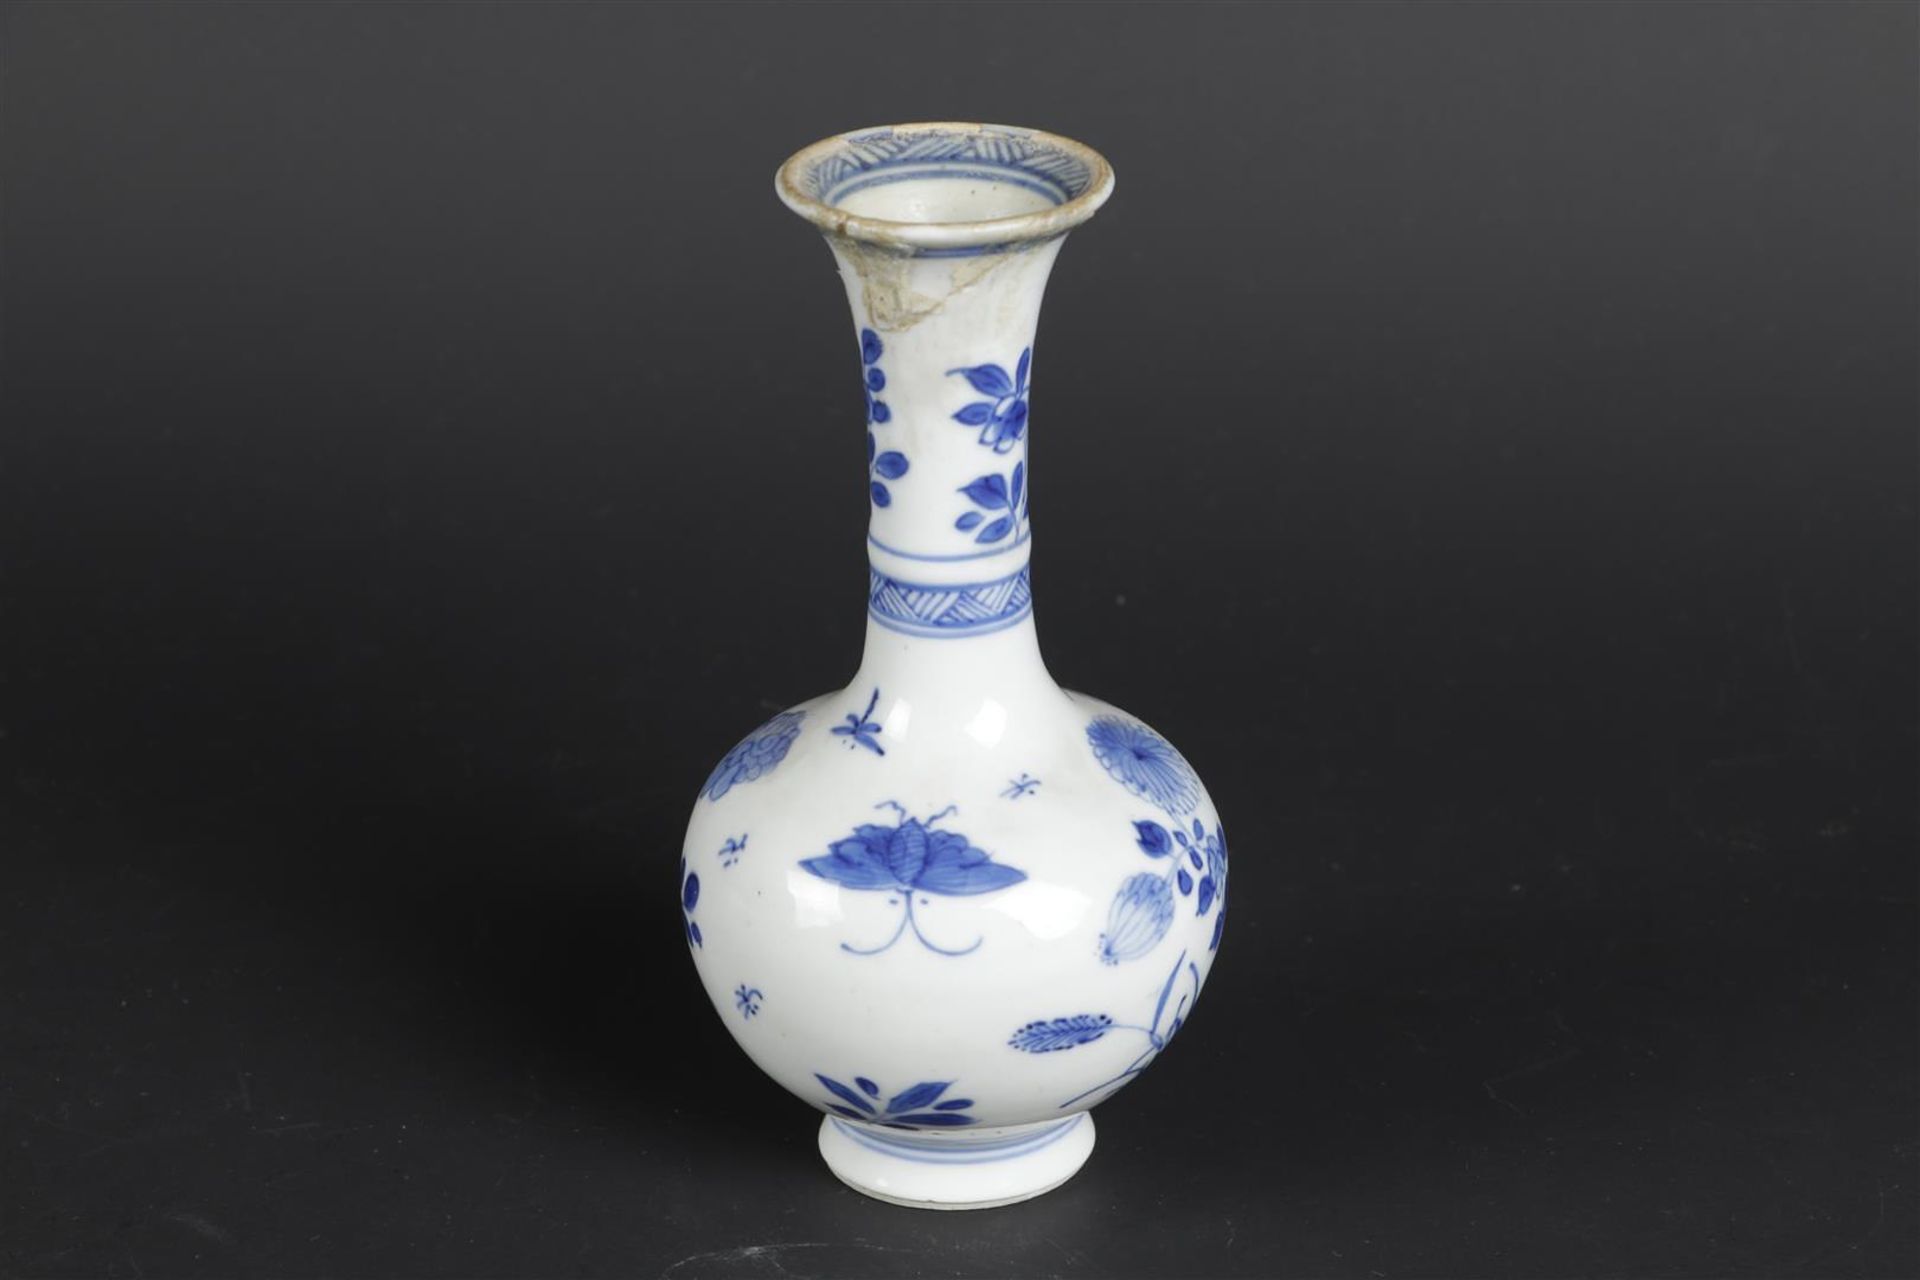 A porcelain belly vase with a slender high neck with floral decor on rock. China, Kangxi. - Image 3 of 5